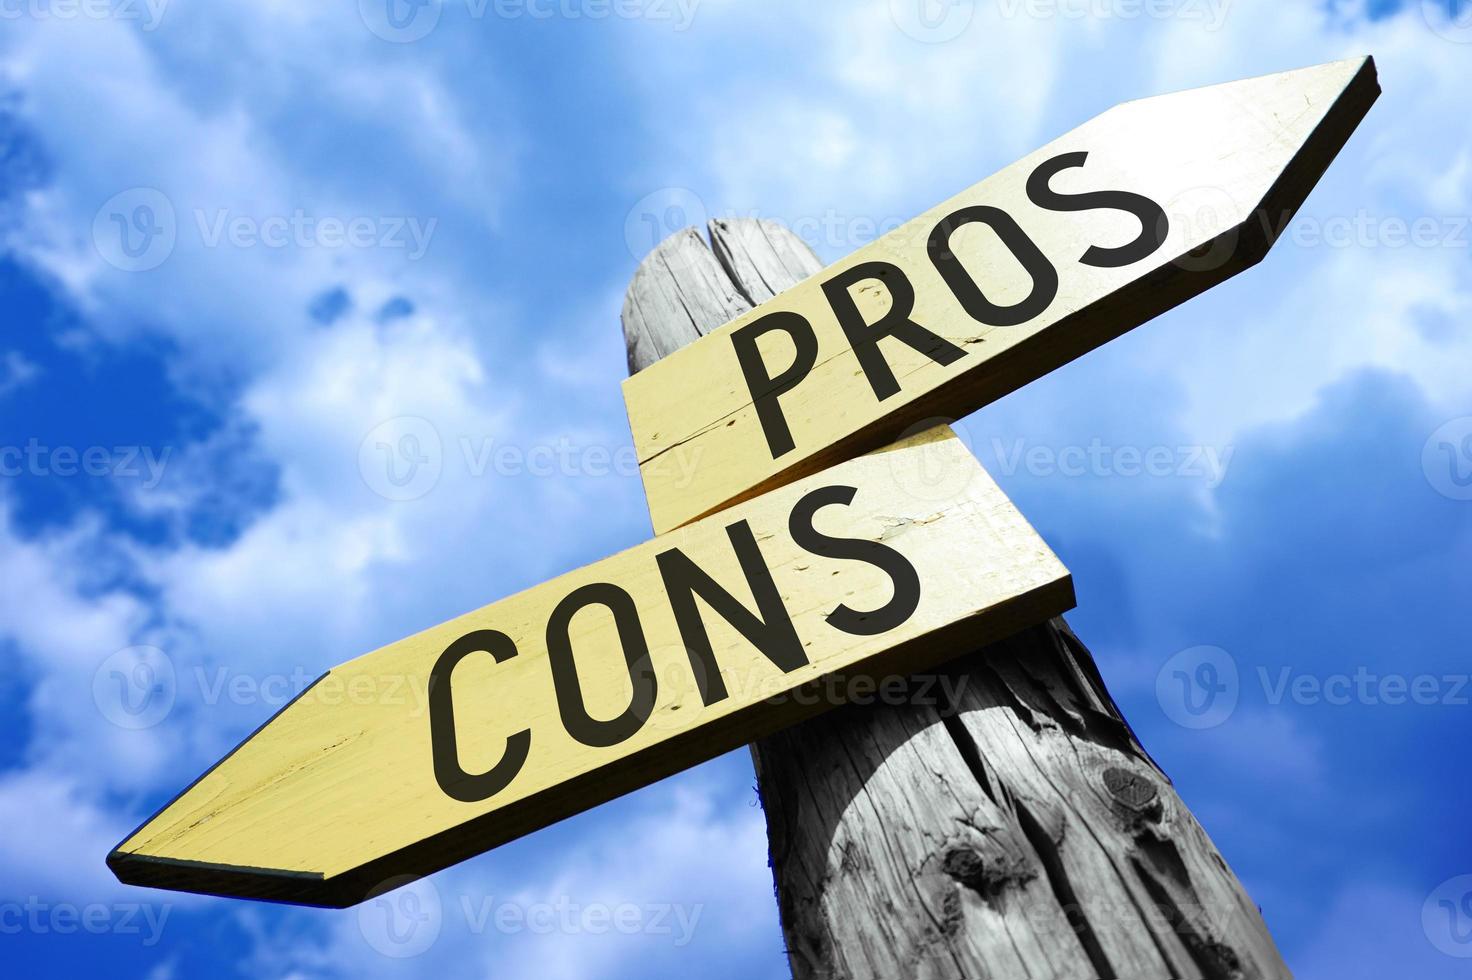 Pros, Cons - Wooden Signpost with Two Arrows and Sky in Background photo